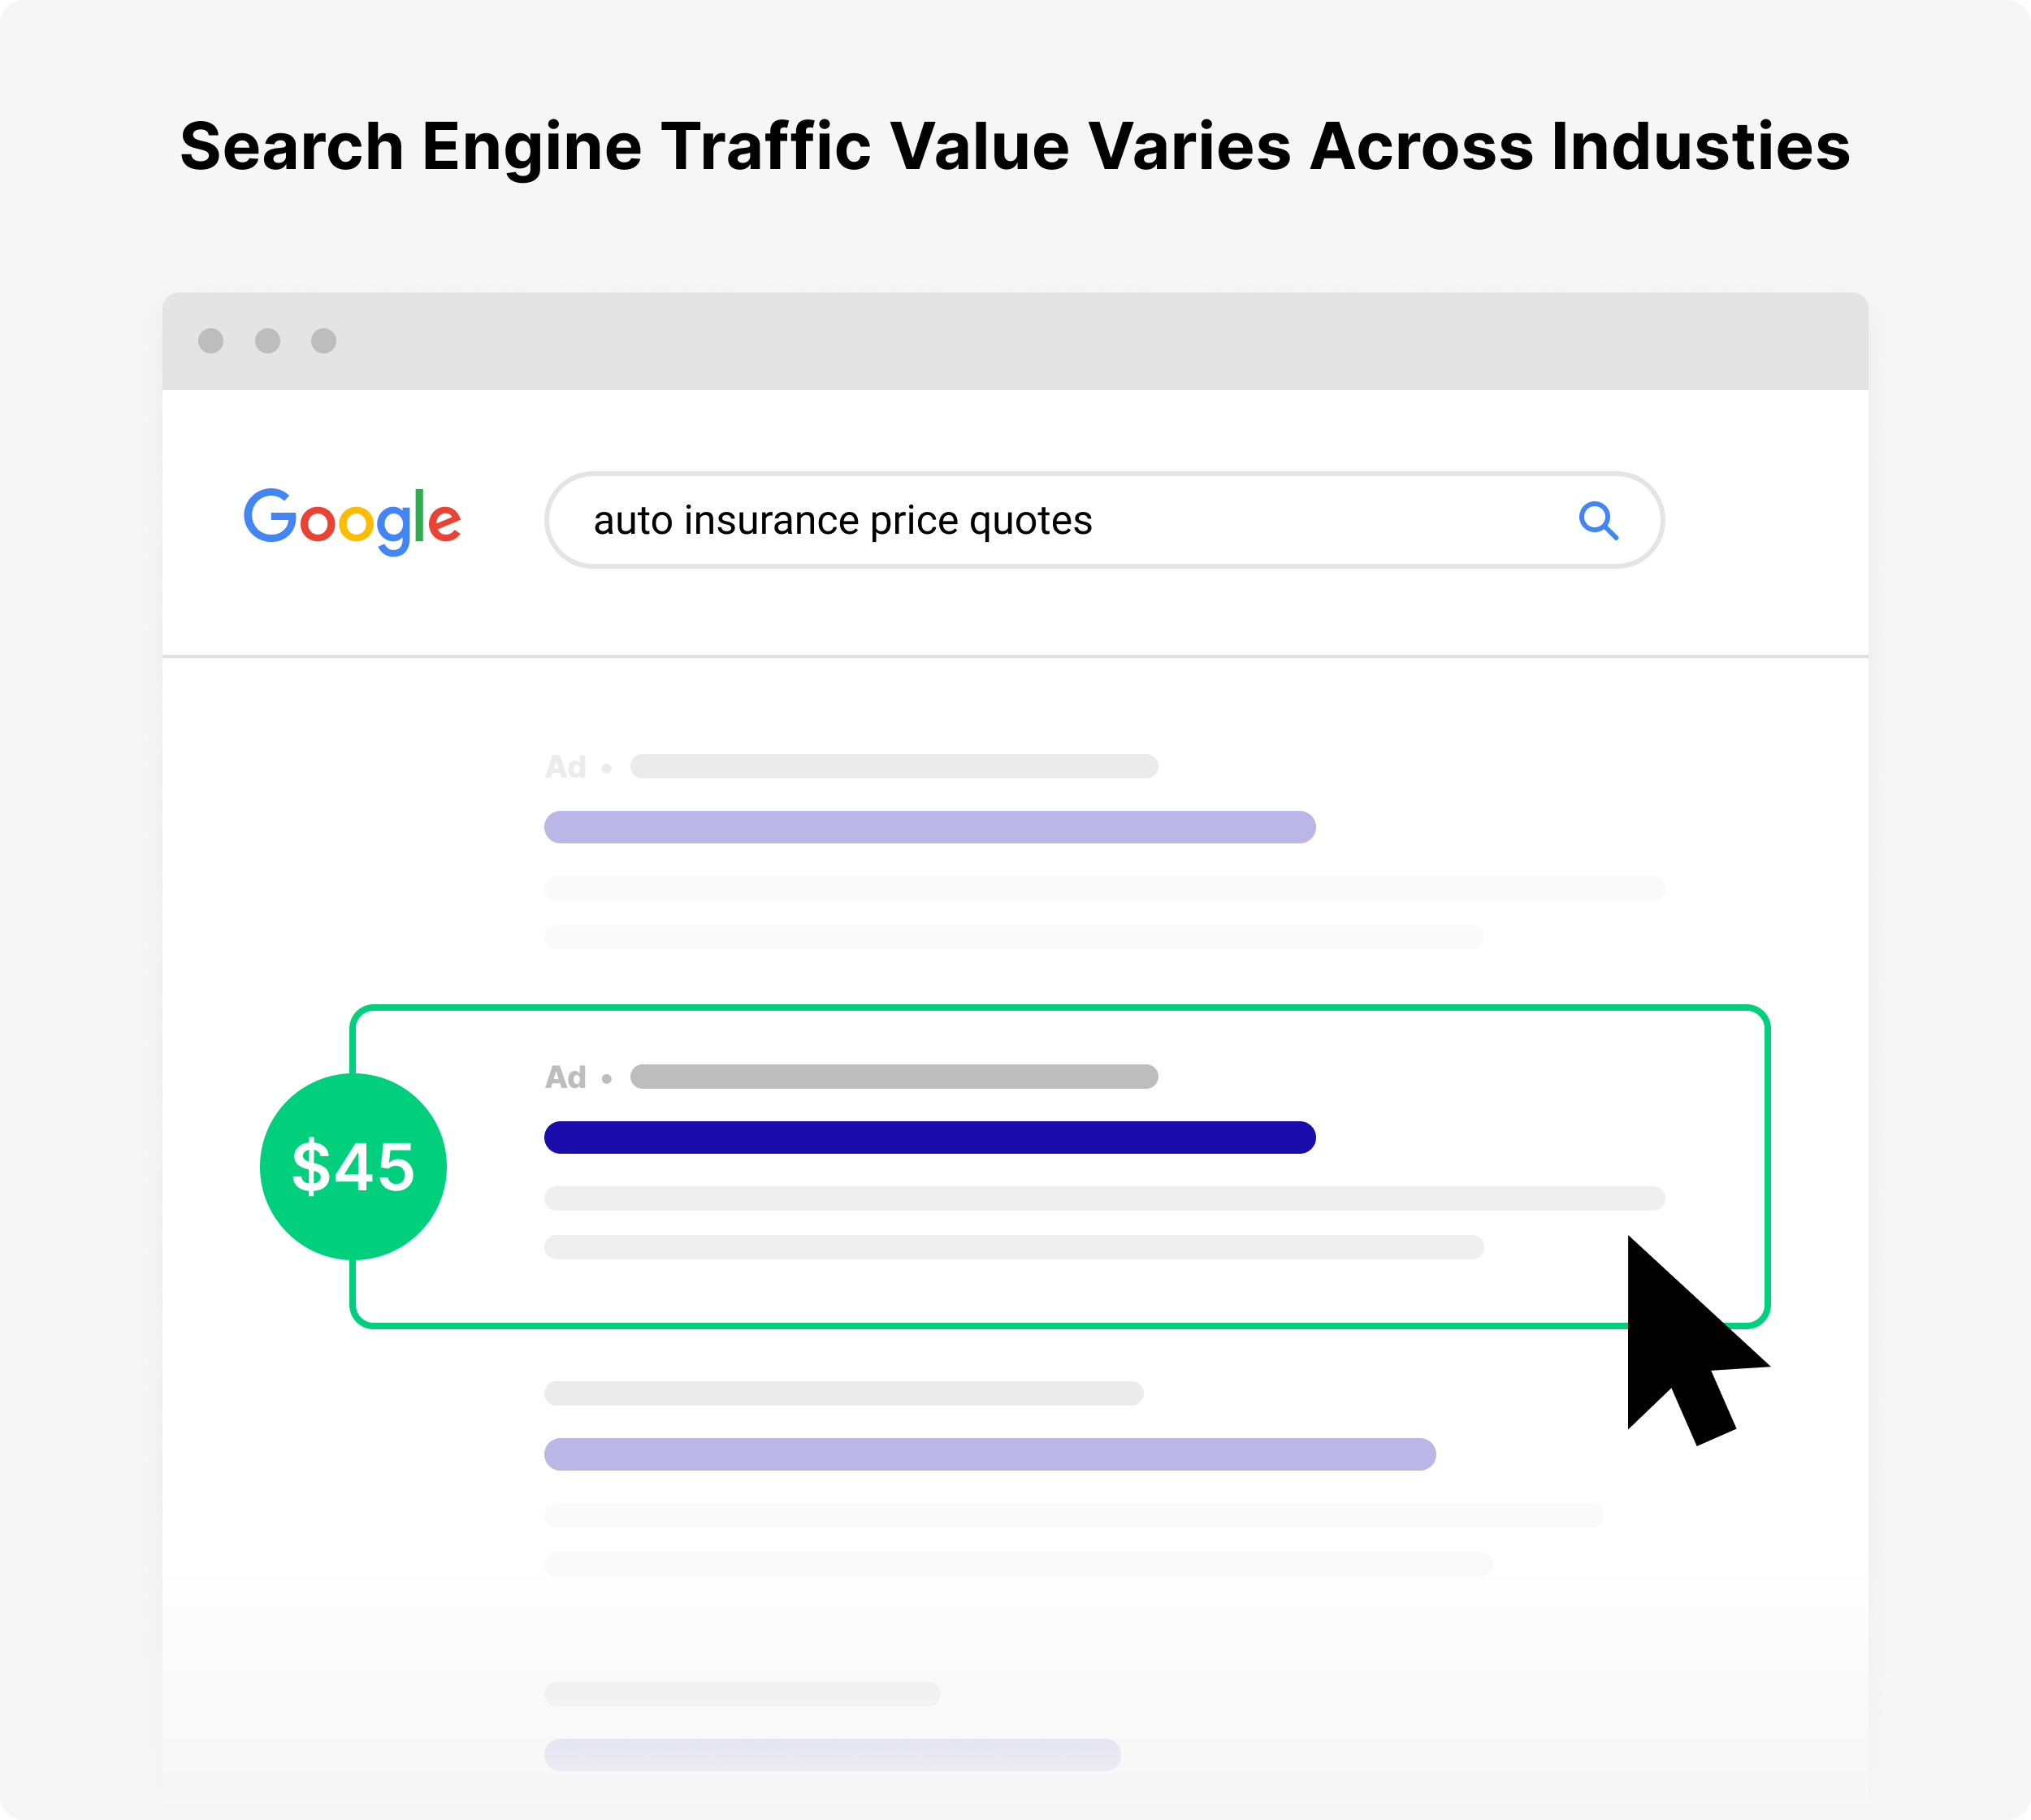 Search engine traffic value across industries